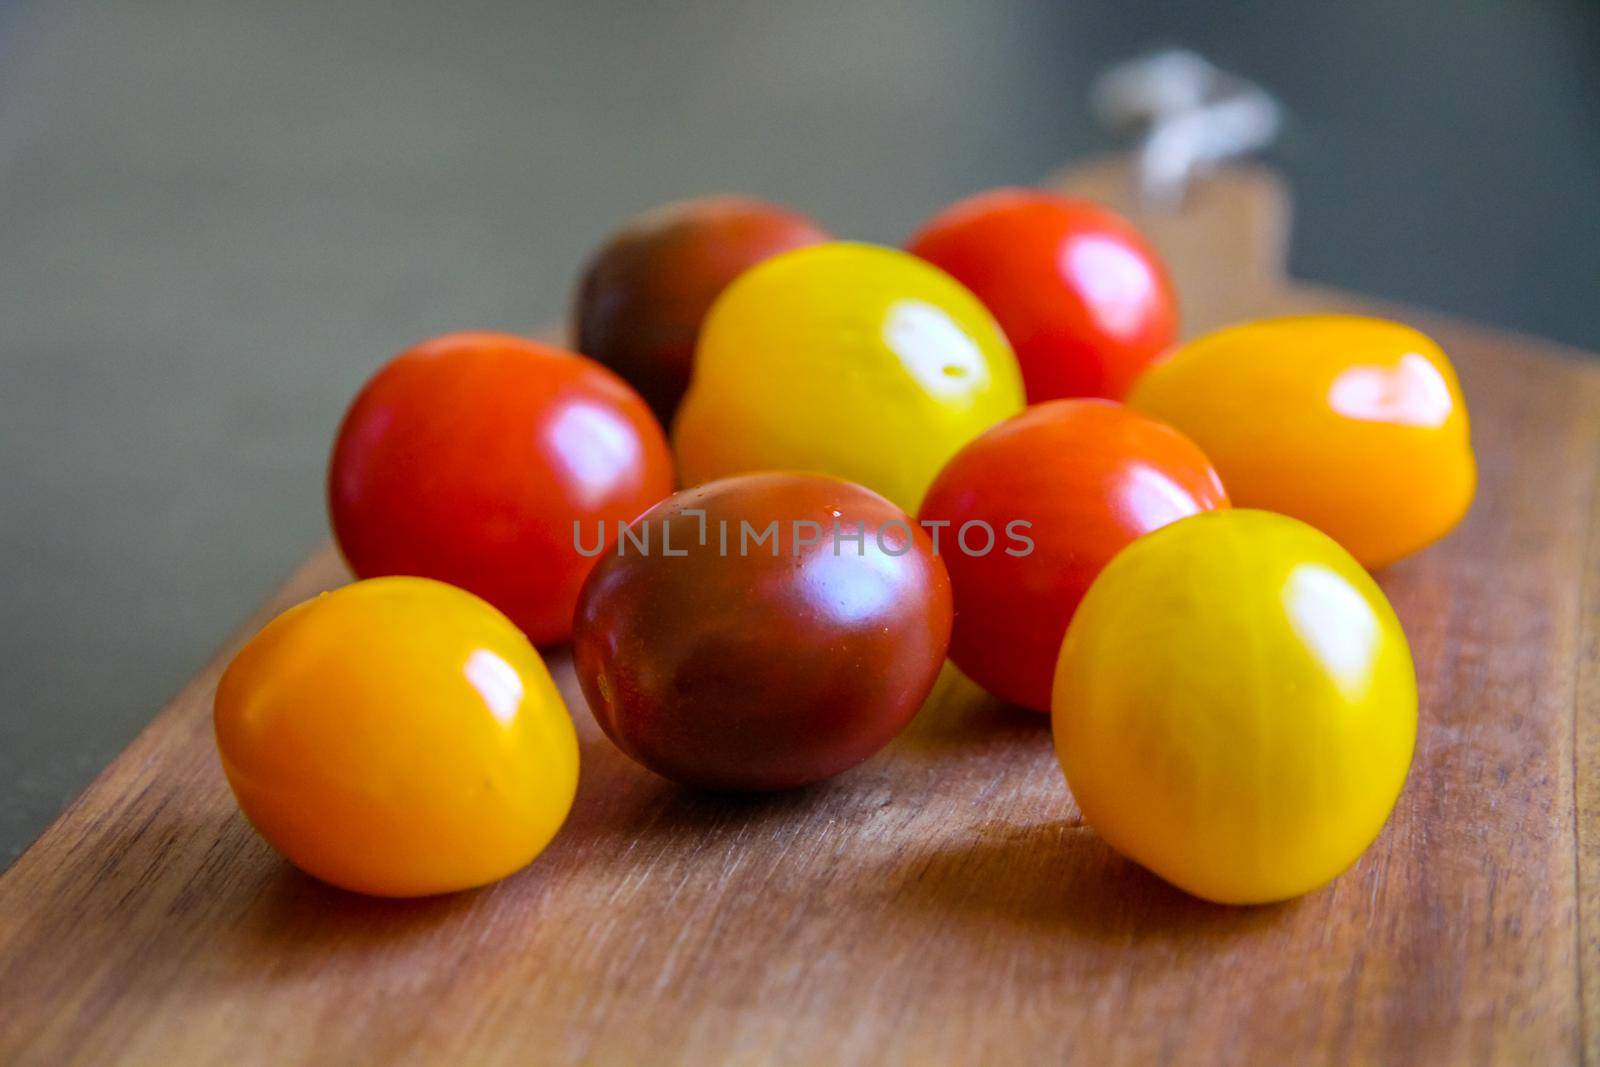 Colorful cocktail tomatoes on a wooden cutting board